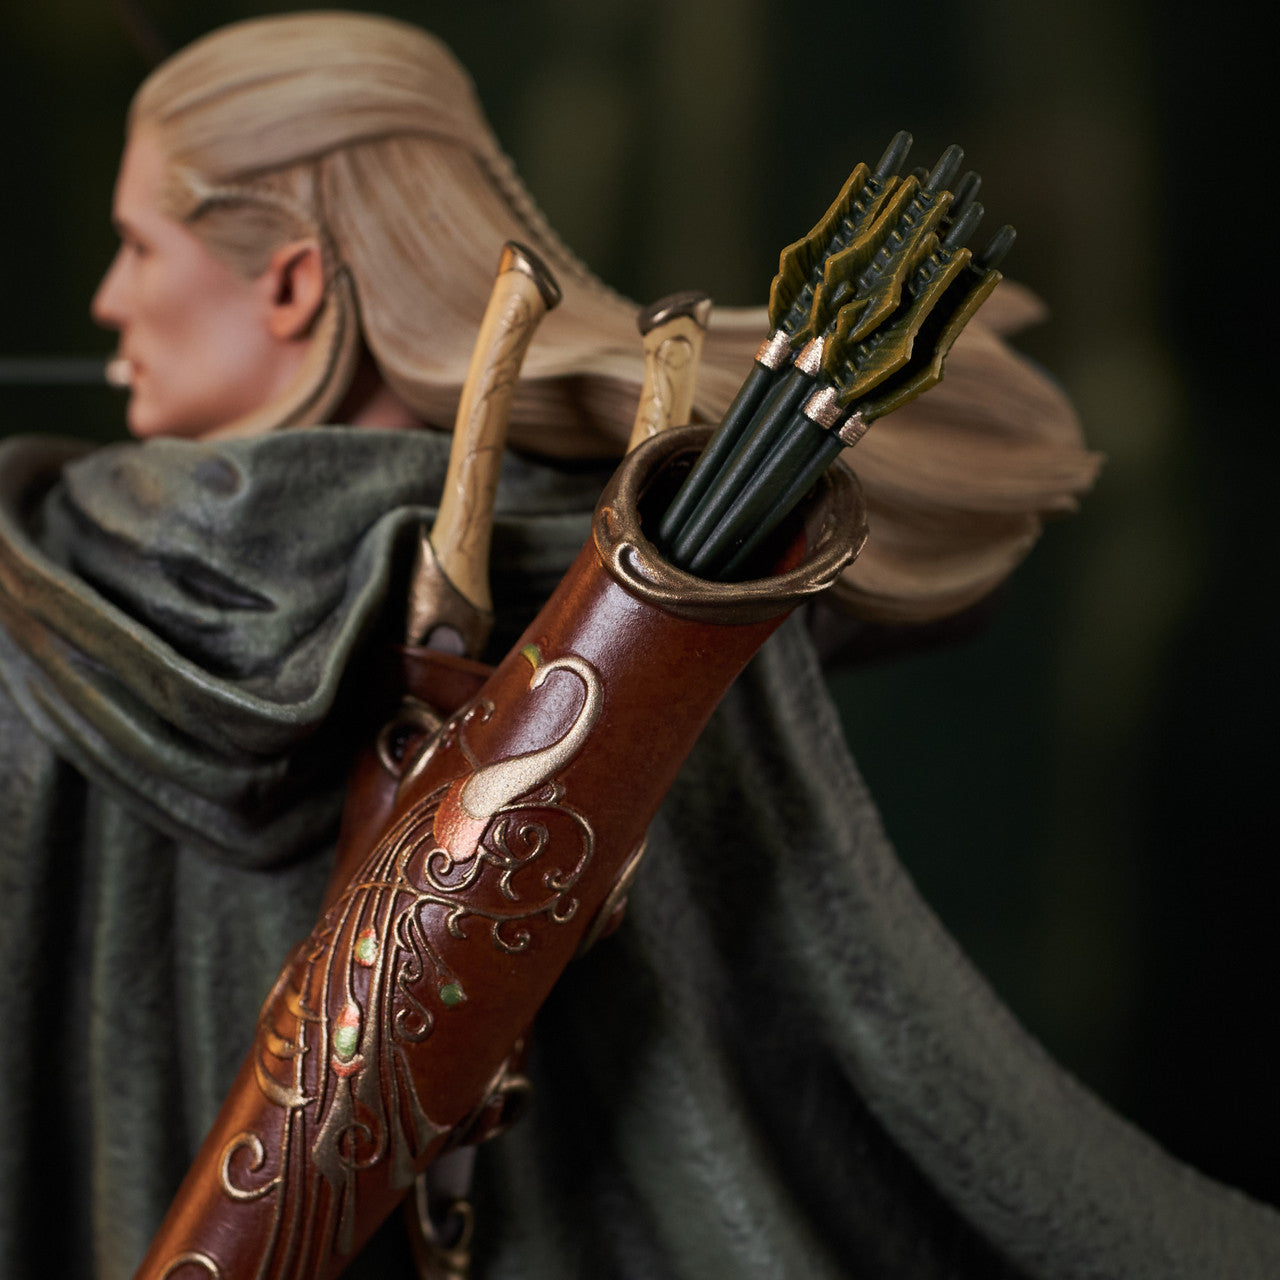 Diamond Select Toys - The Lord of the Rings - Legolas - Marvelous Toys